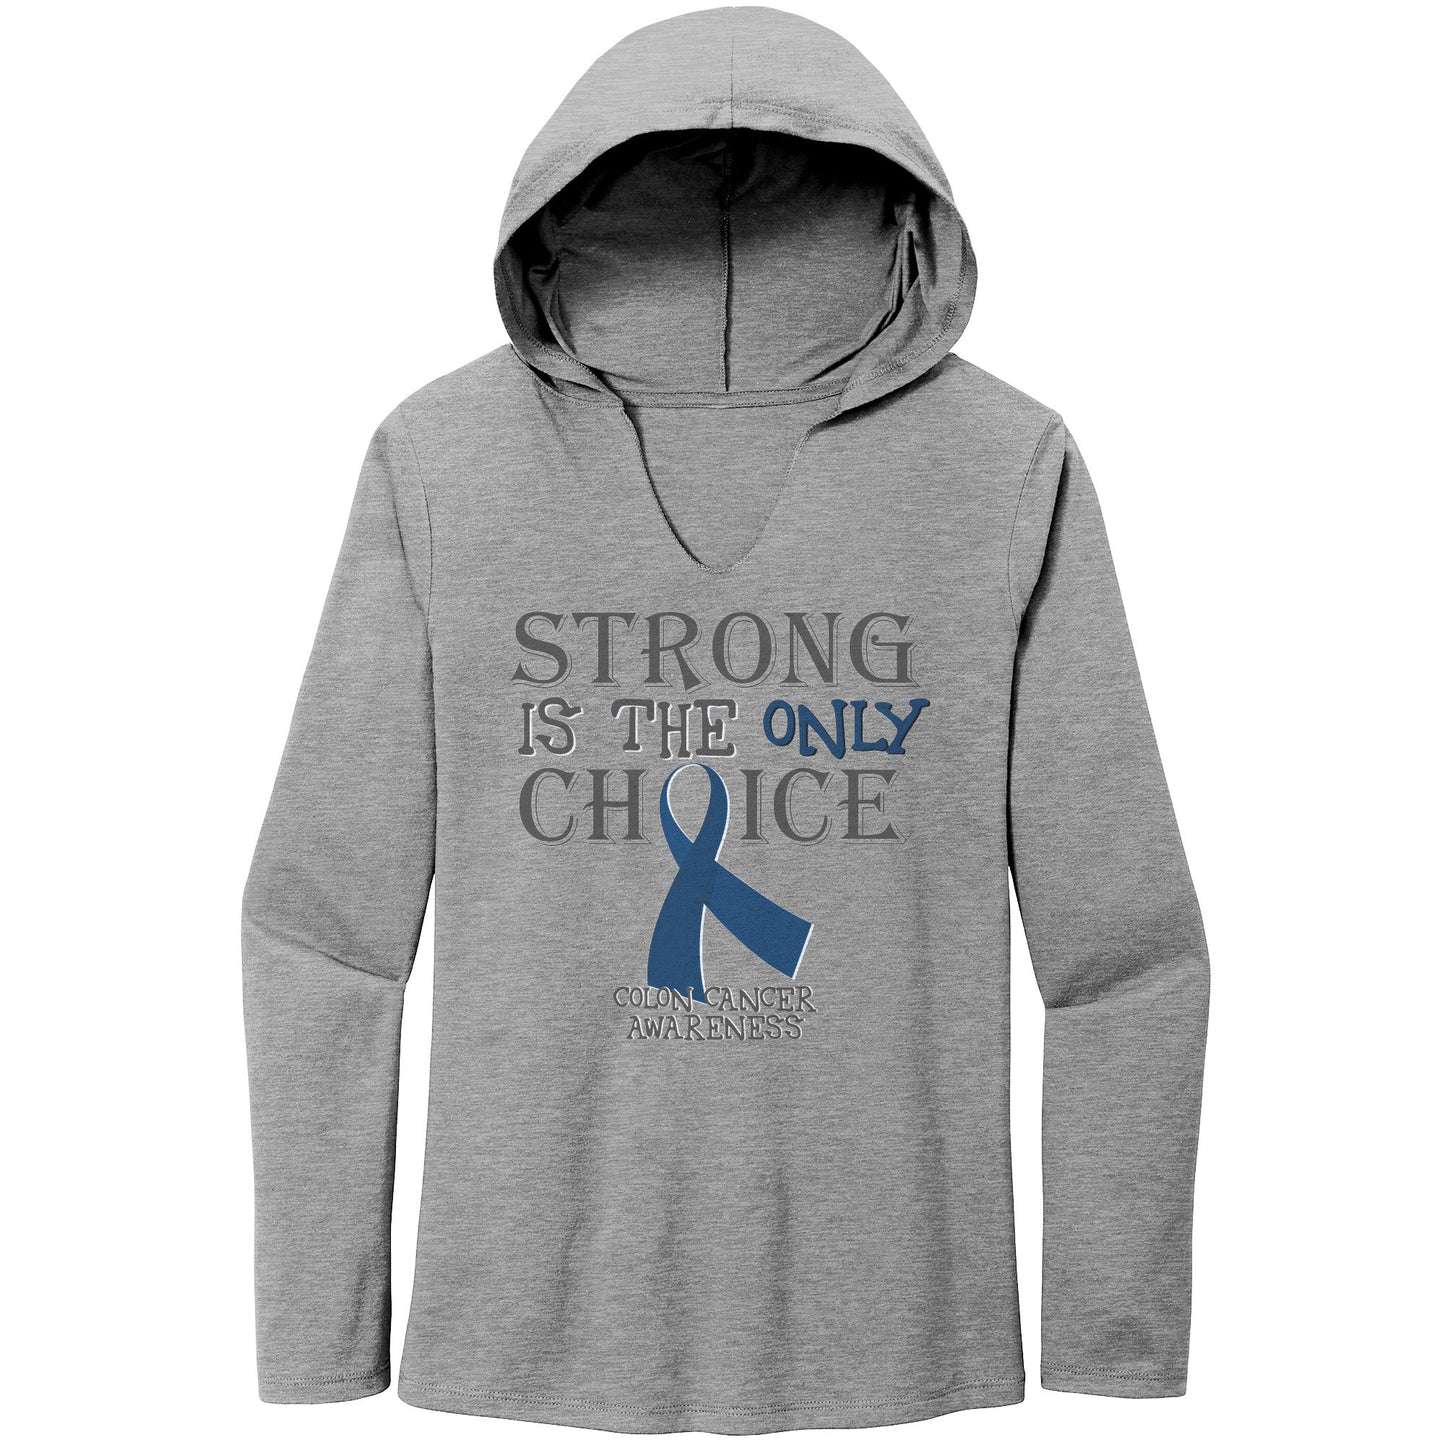 Strong is the Only Choice -Colon Cancer Awareness T-Shirt, Hoodie, Tank |x|